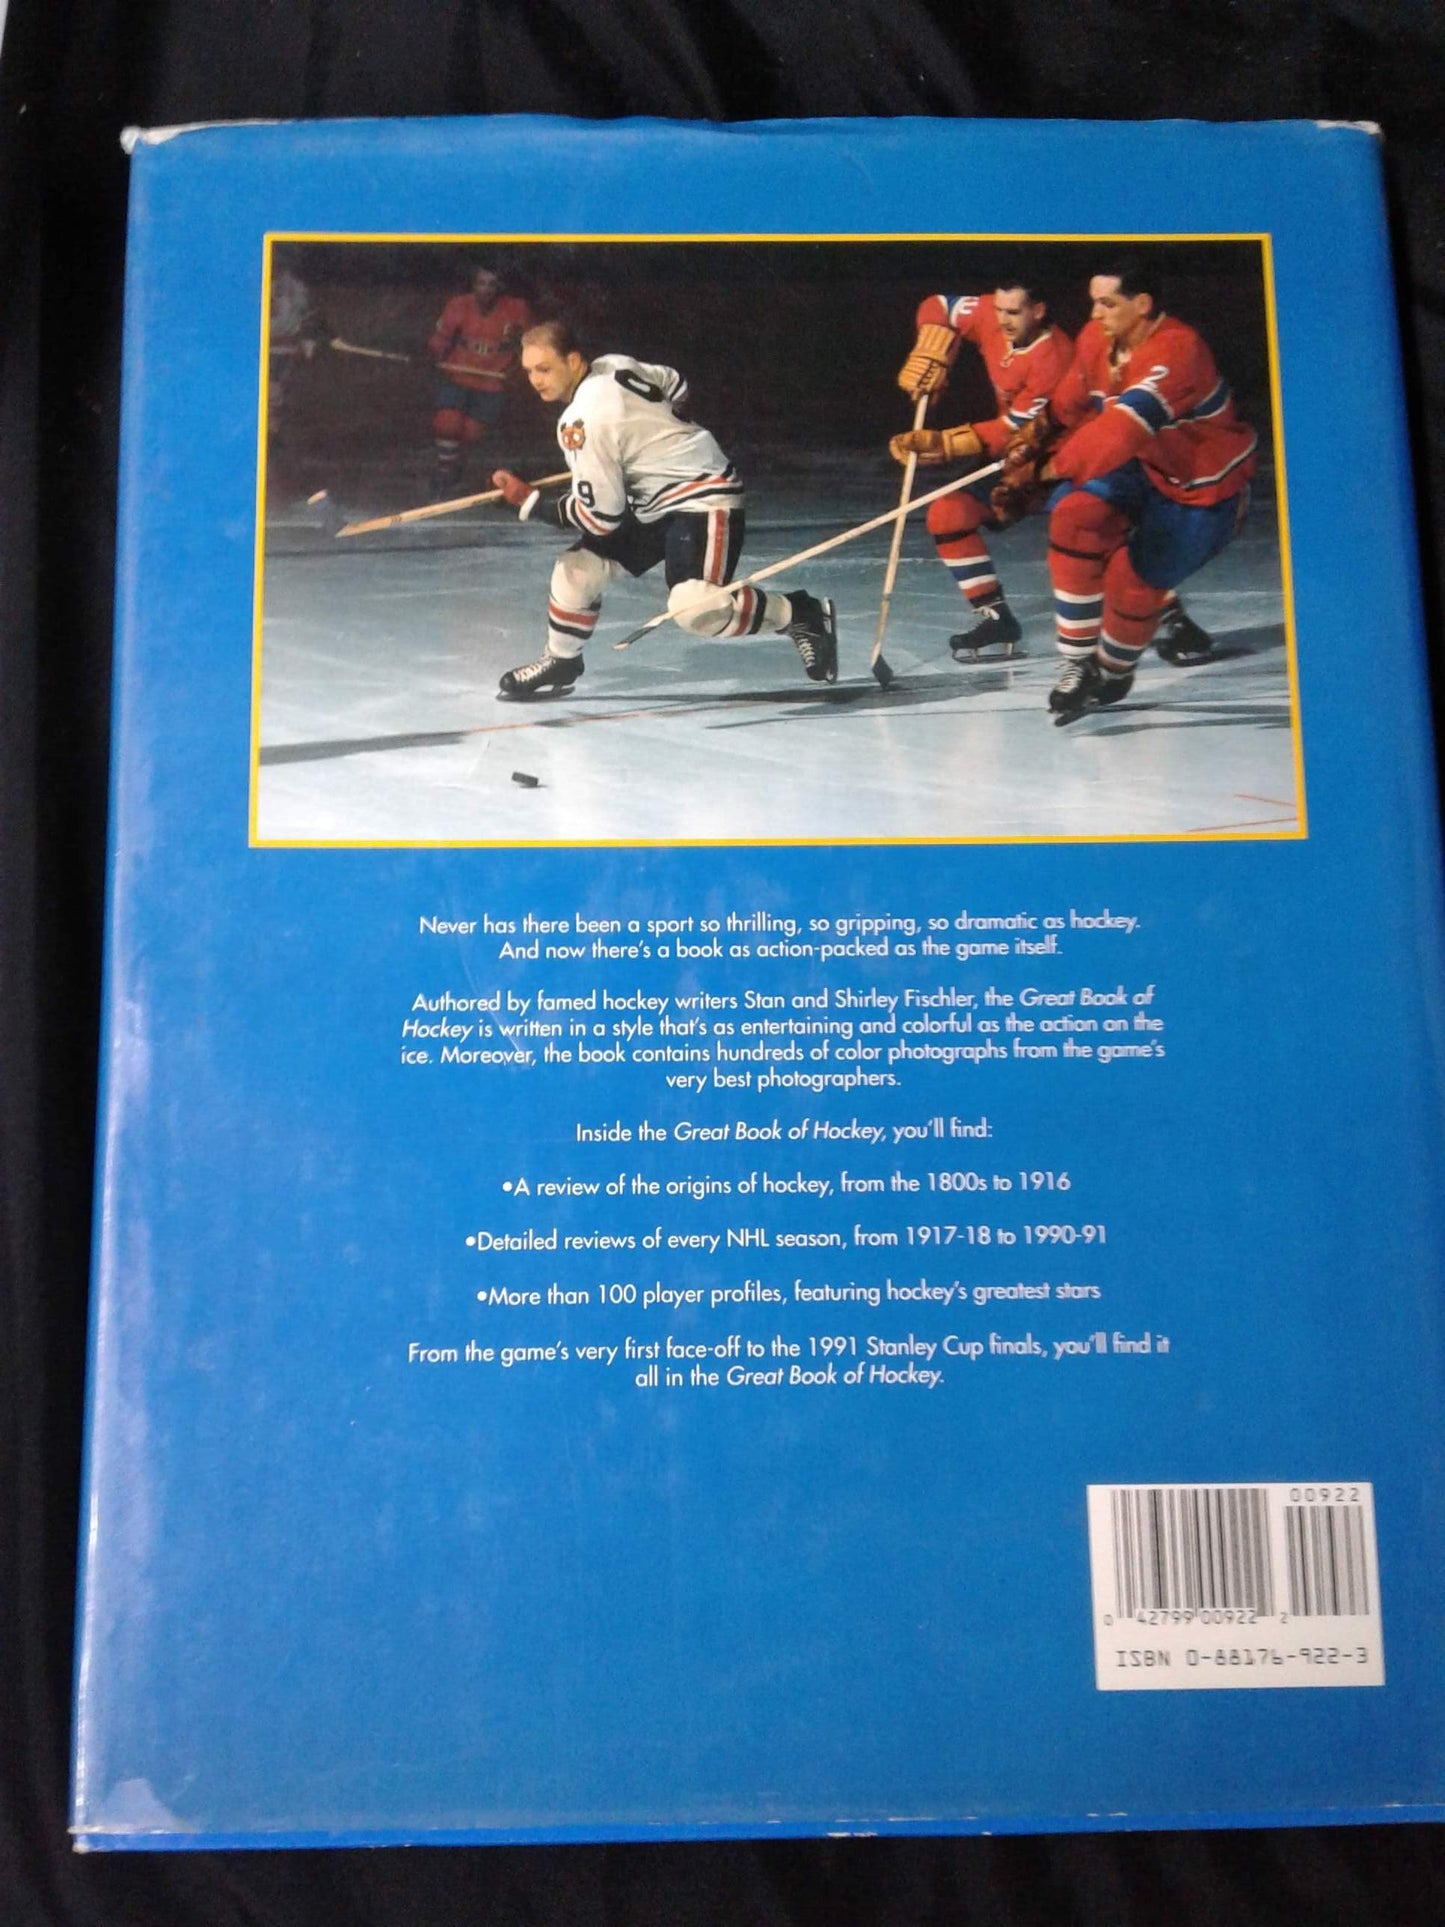 Great book of hockey more than 100 years of fire on ice